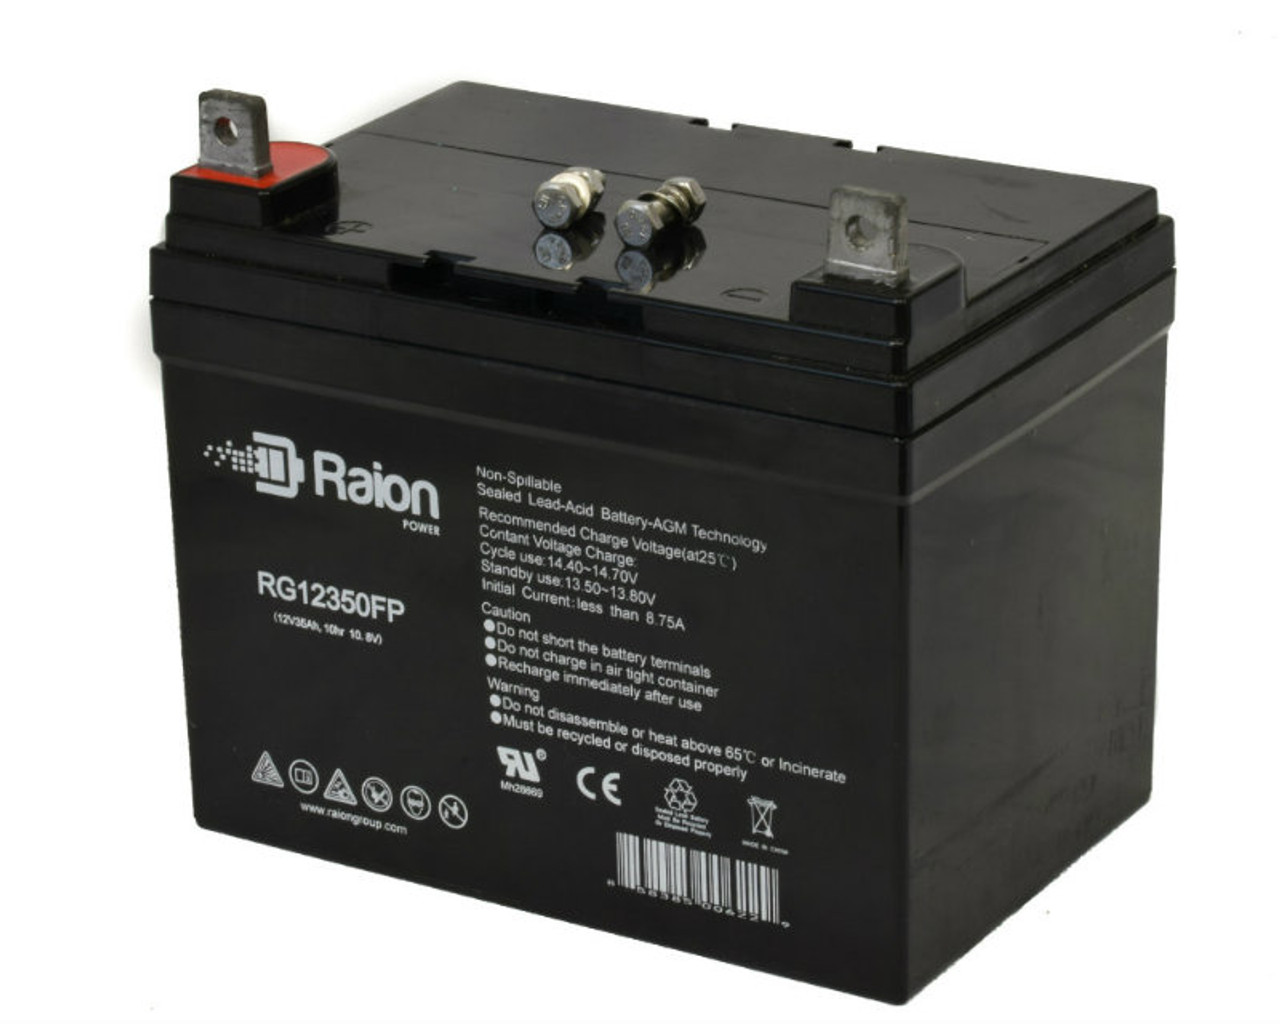 Raion Power Replacement 12V 35Ah RG12350FP Mobility Scooter Battery for Everest & Jennings Wheelchairs Navigator